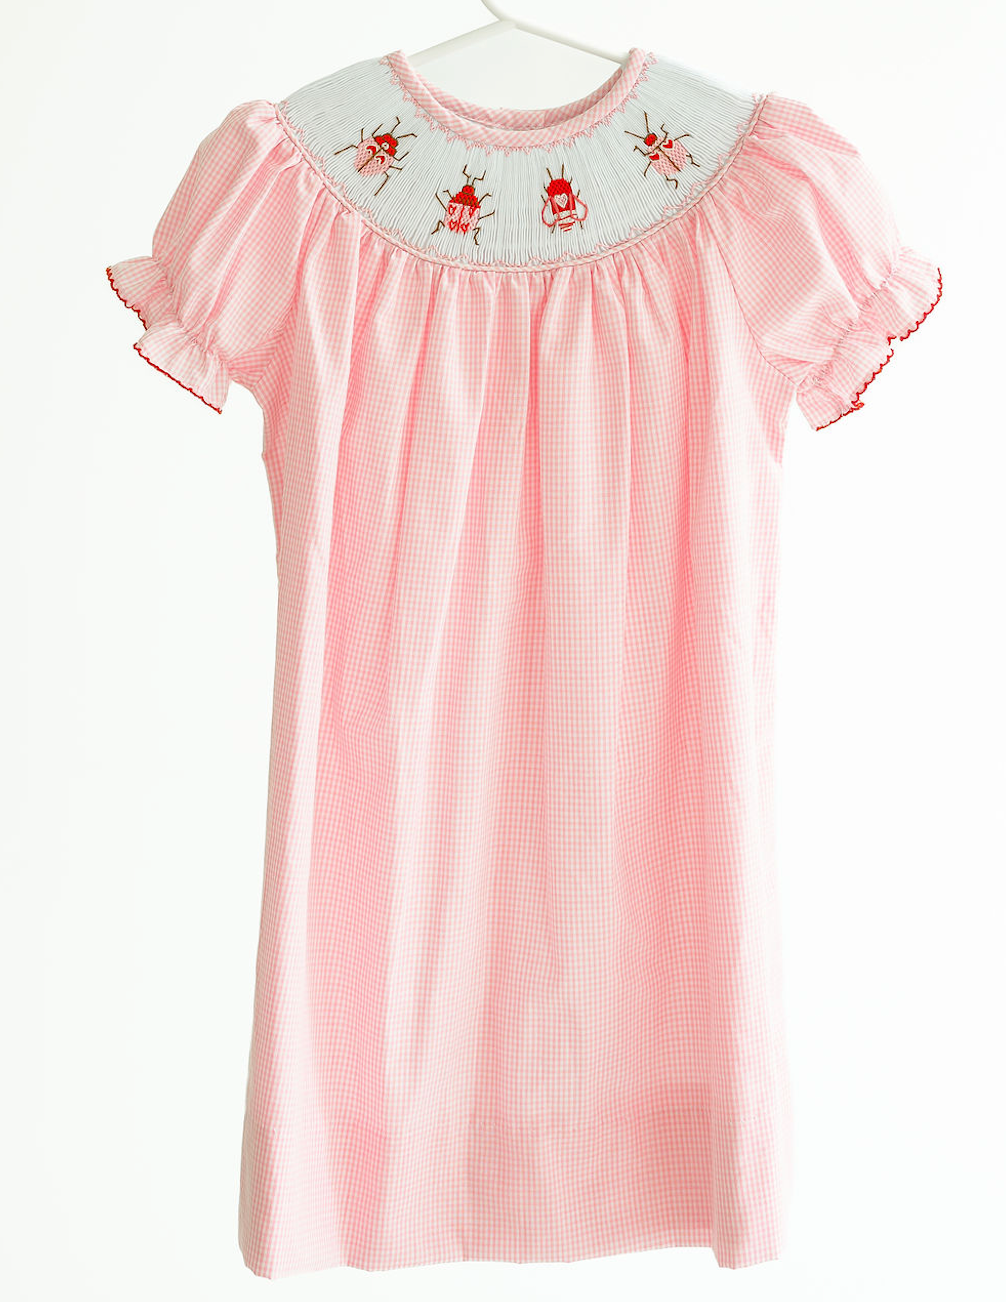 Girls pink gingham bishop love bug Valentines Day dress by Ruth and Ralph. 